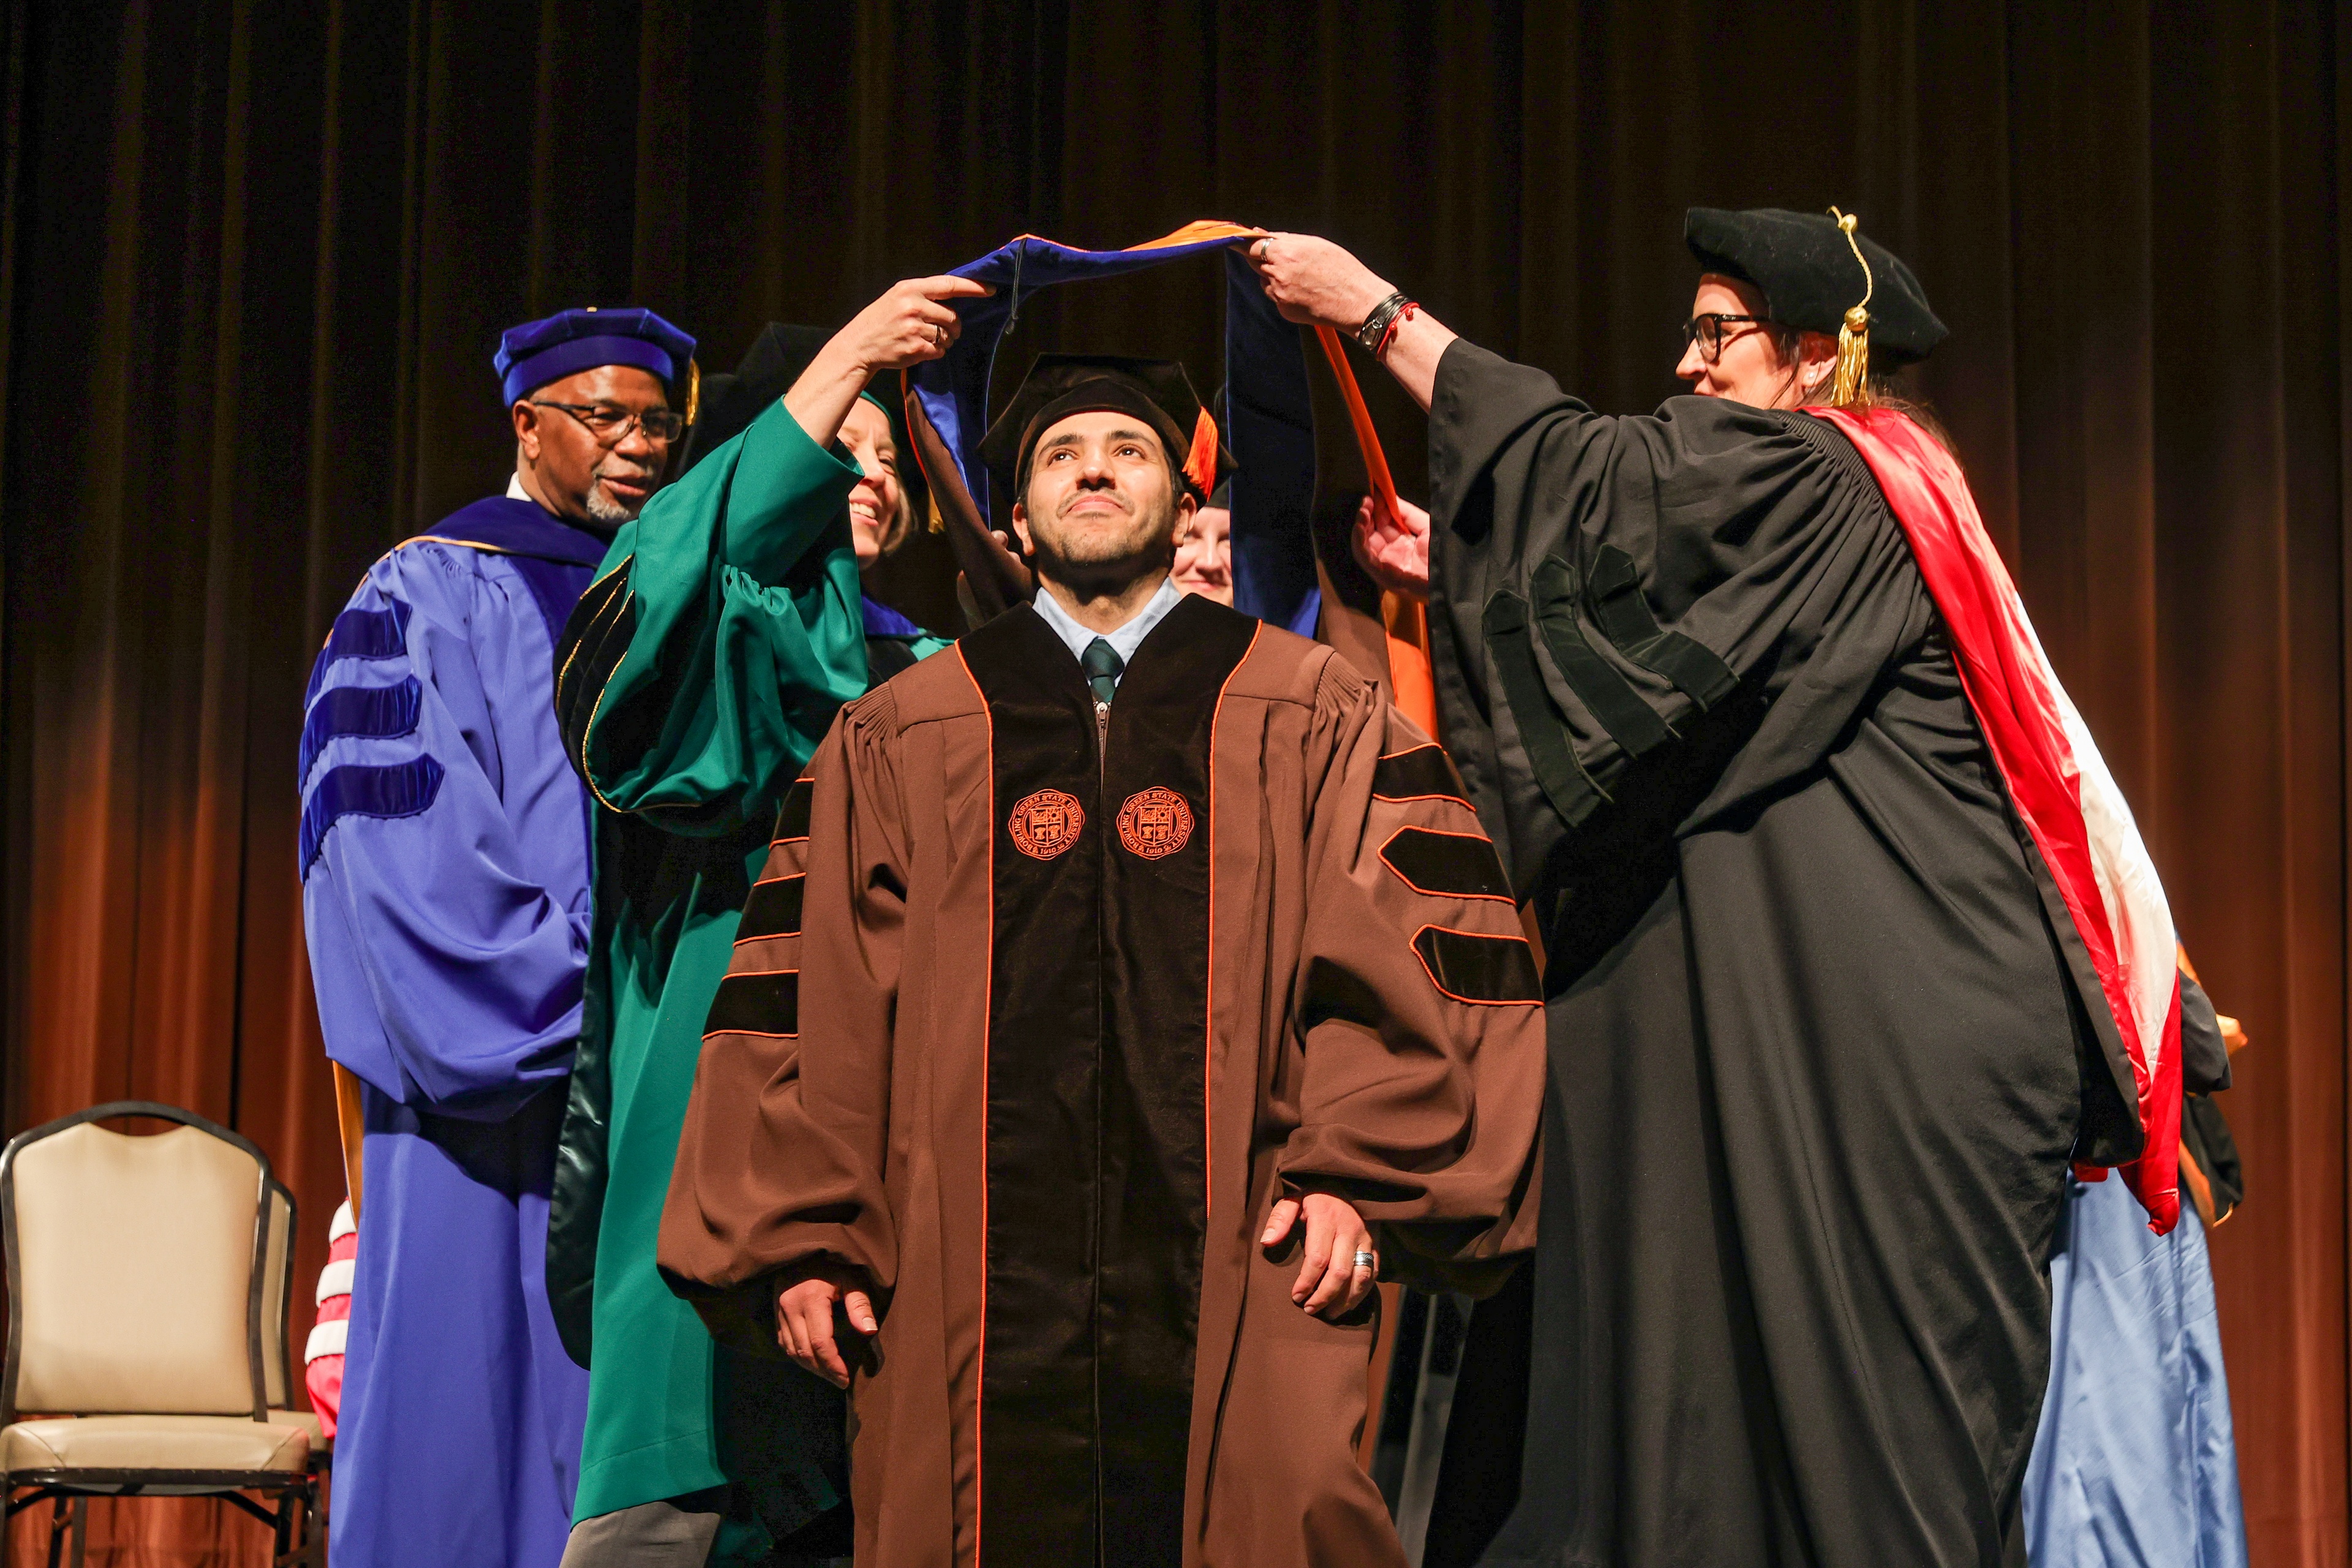 A BGSU doctoral student is hooded on stage at Kobacker Hall